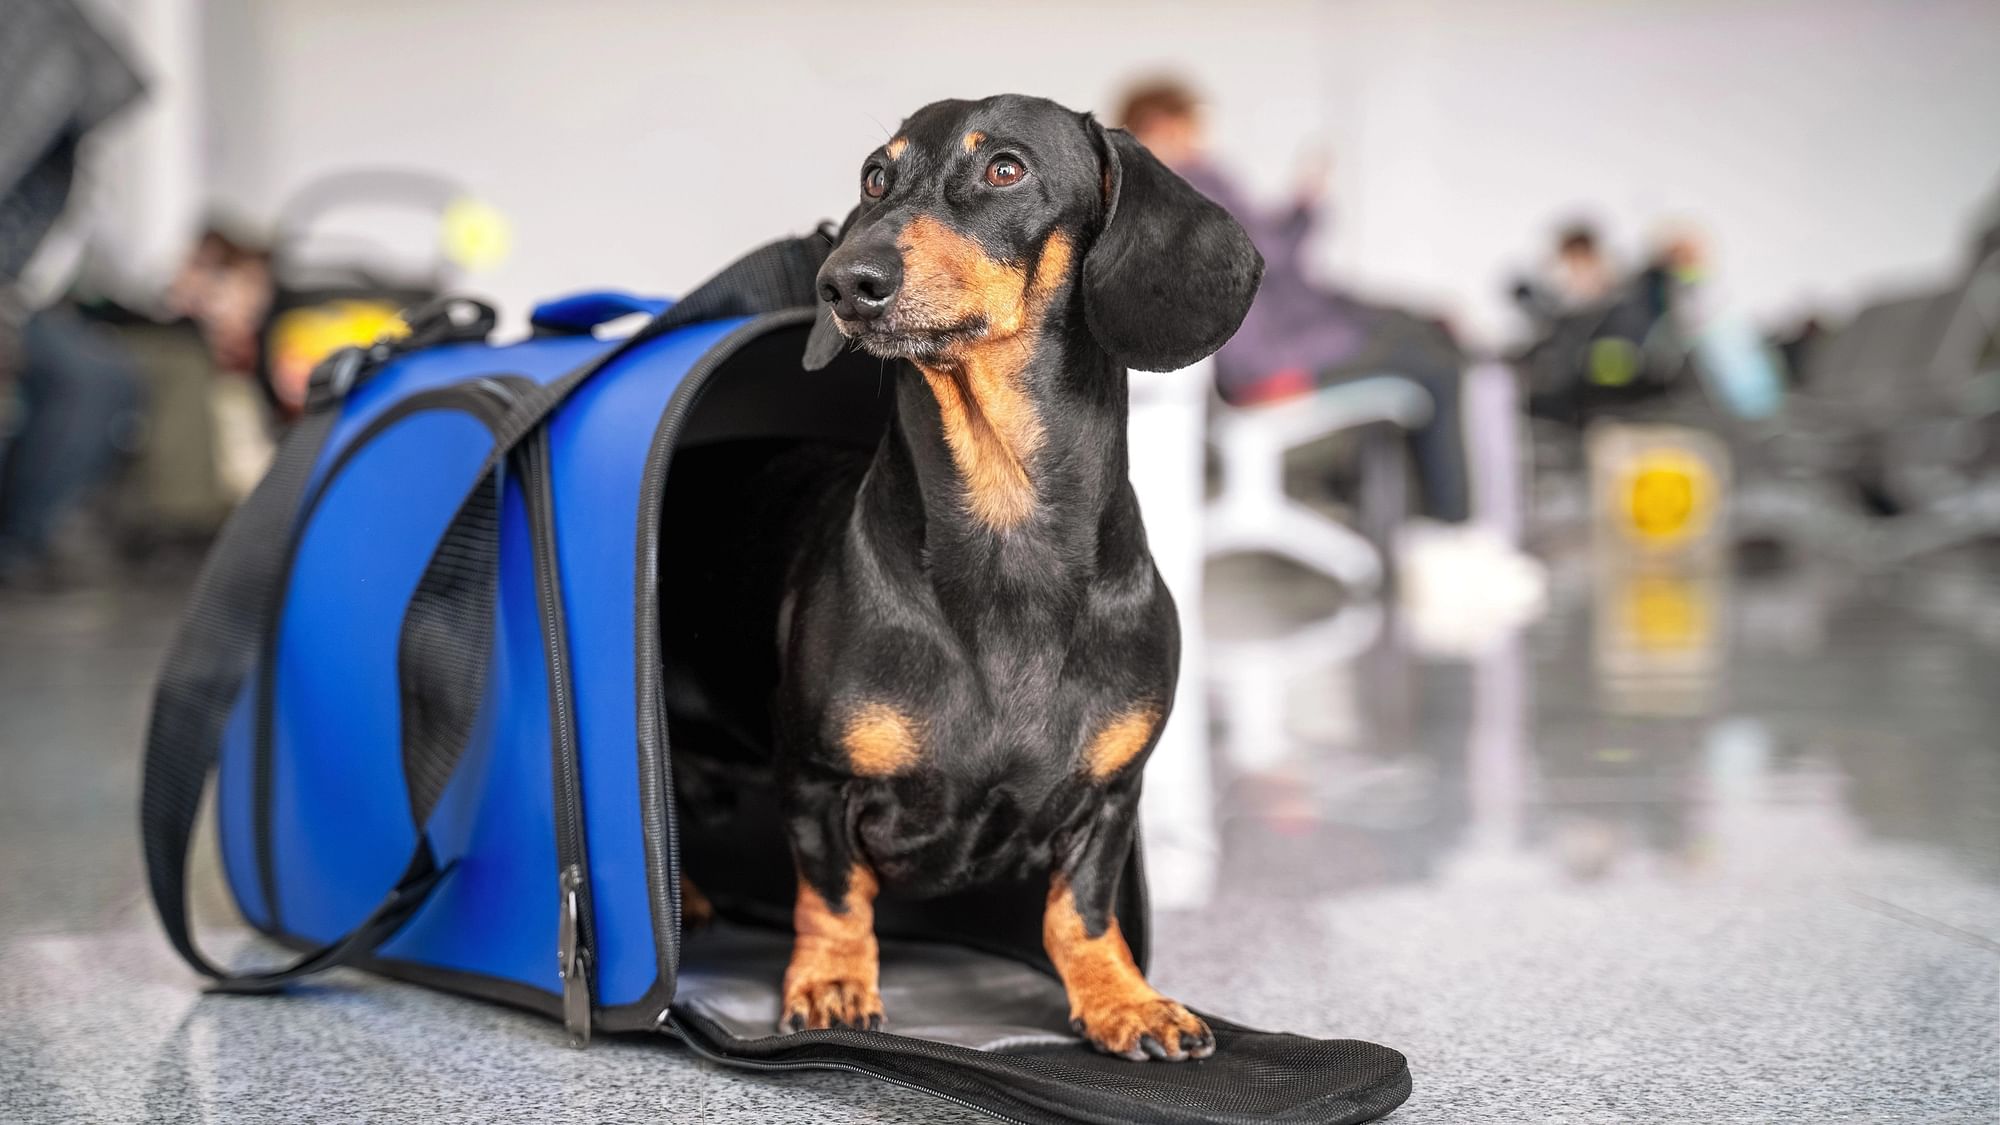 <div class="paragraphs"><p>Akasa Air, in October, announced that it would start allowing “domesticated dogs and cats” weighing up to 7 kg in the cabin with fliers from 1 November.</p></div>